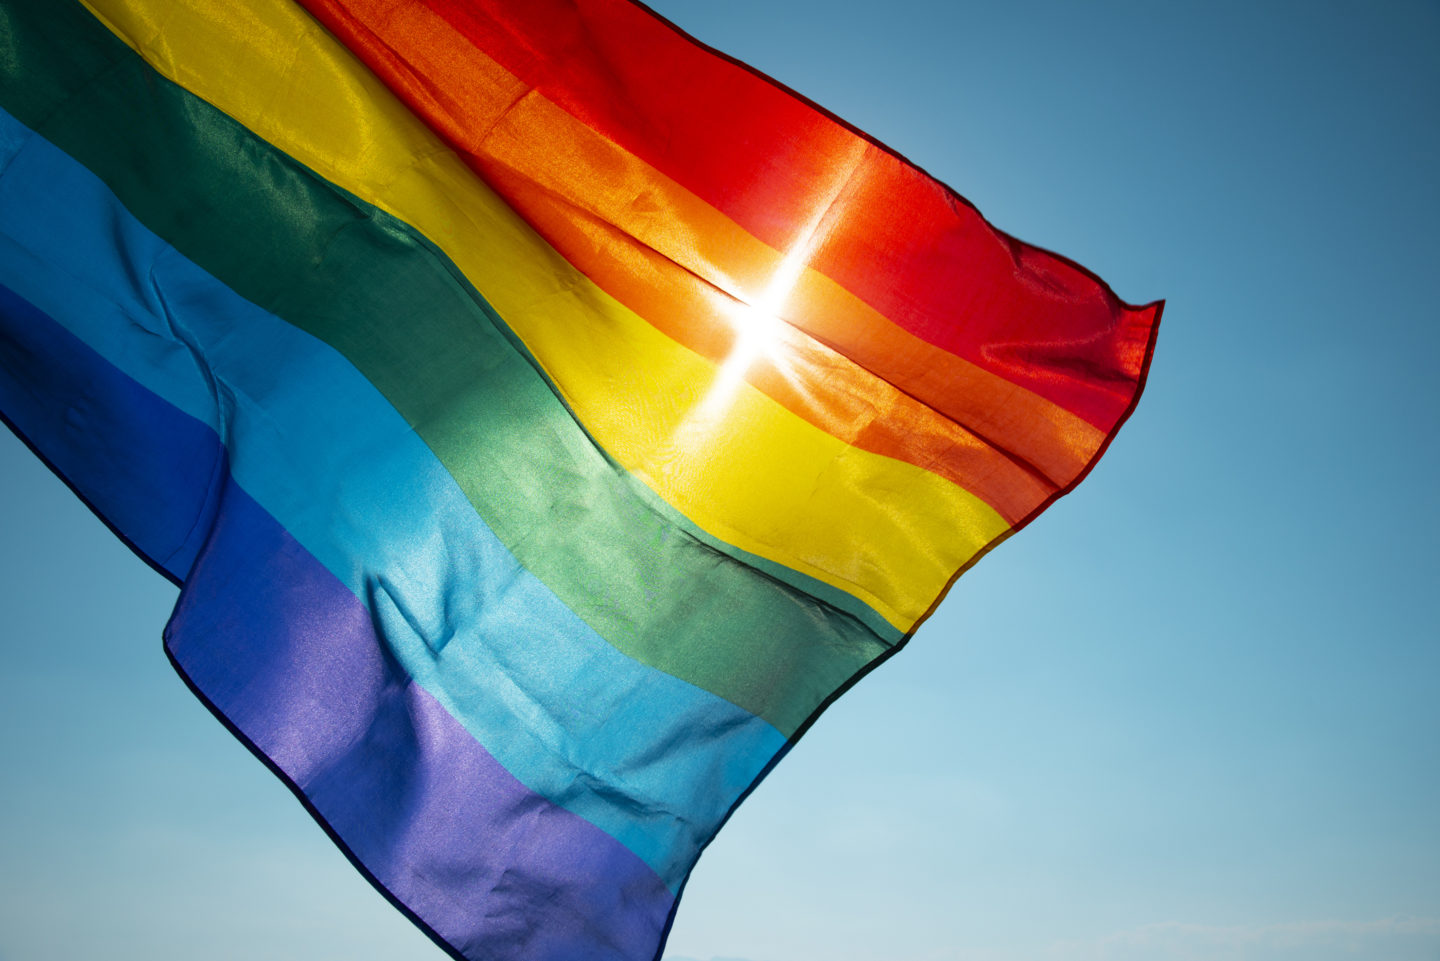 Catholic church told to shut down gay conversion therapy groups 4